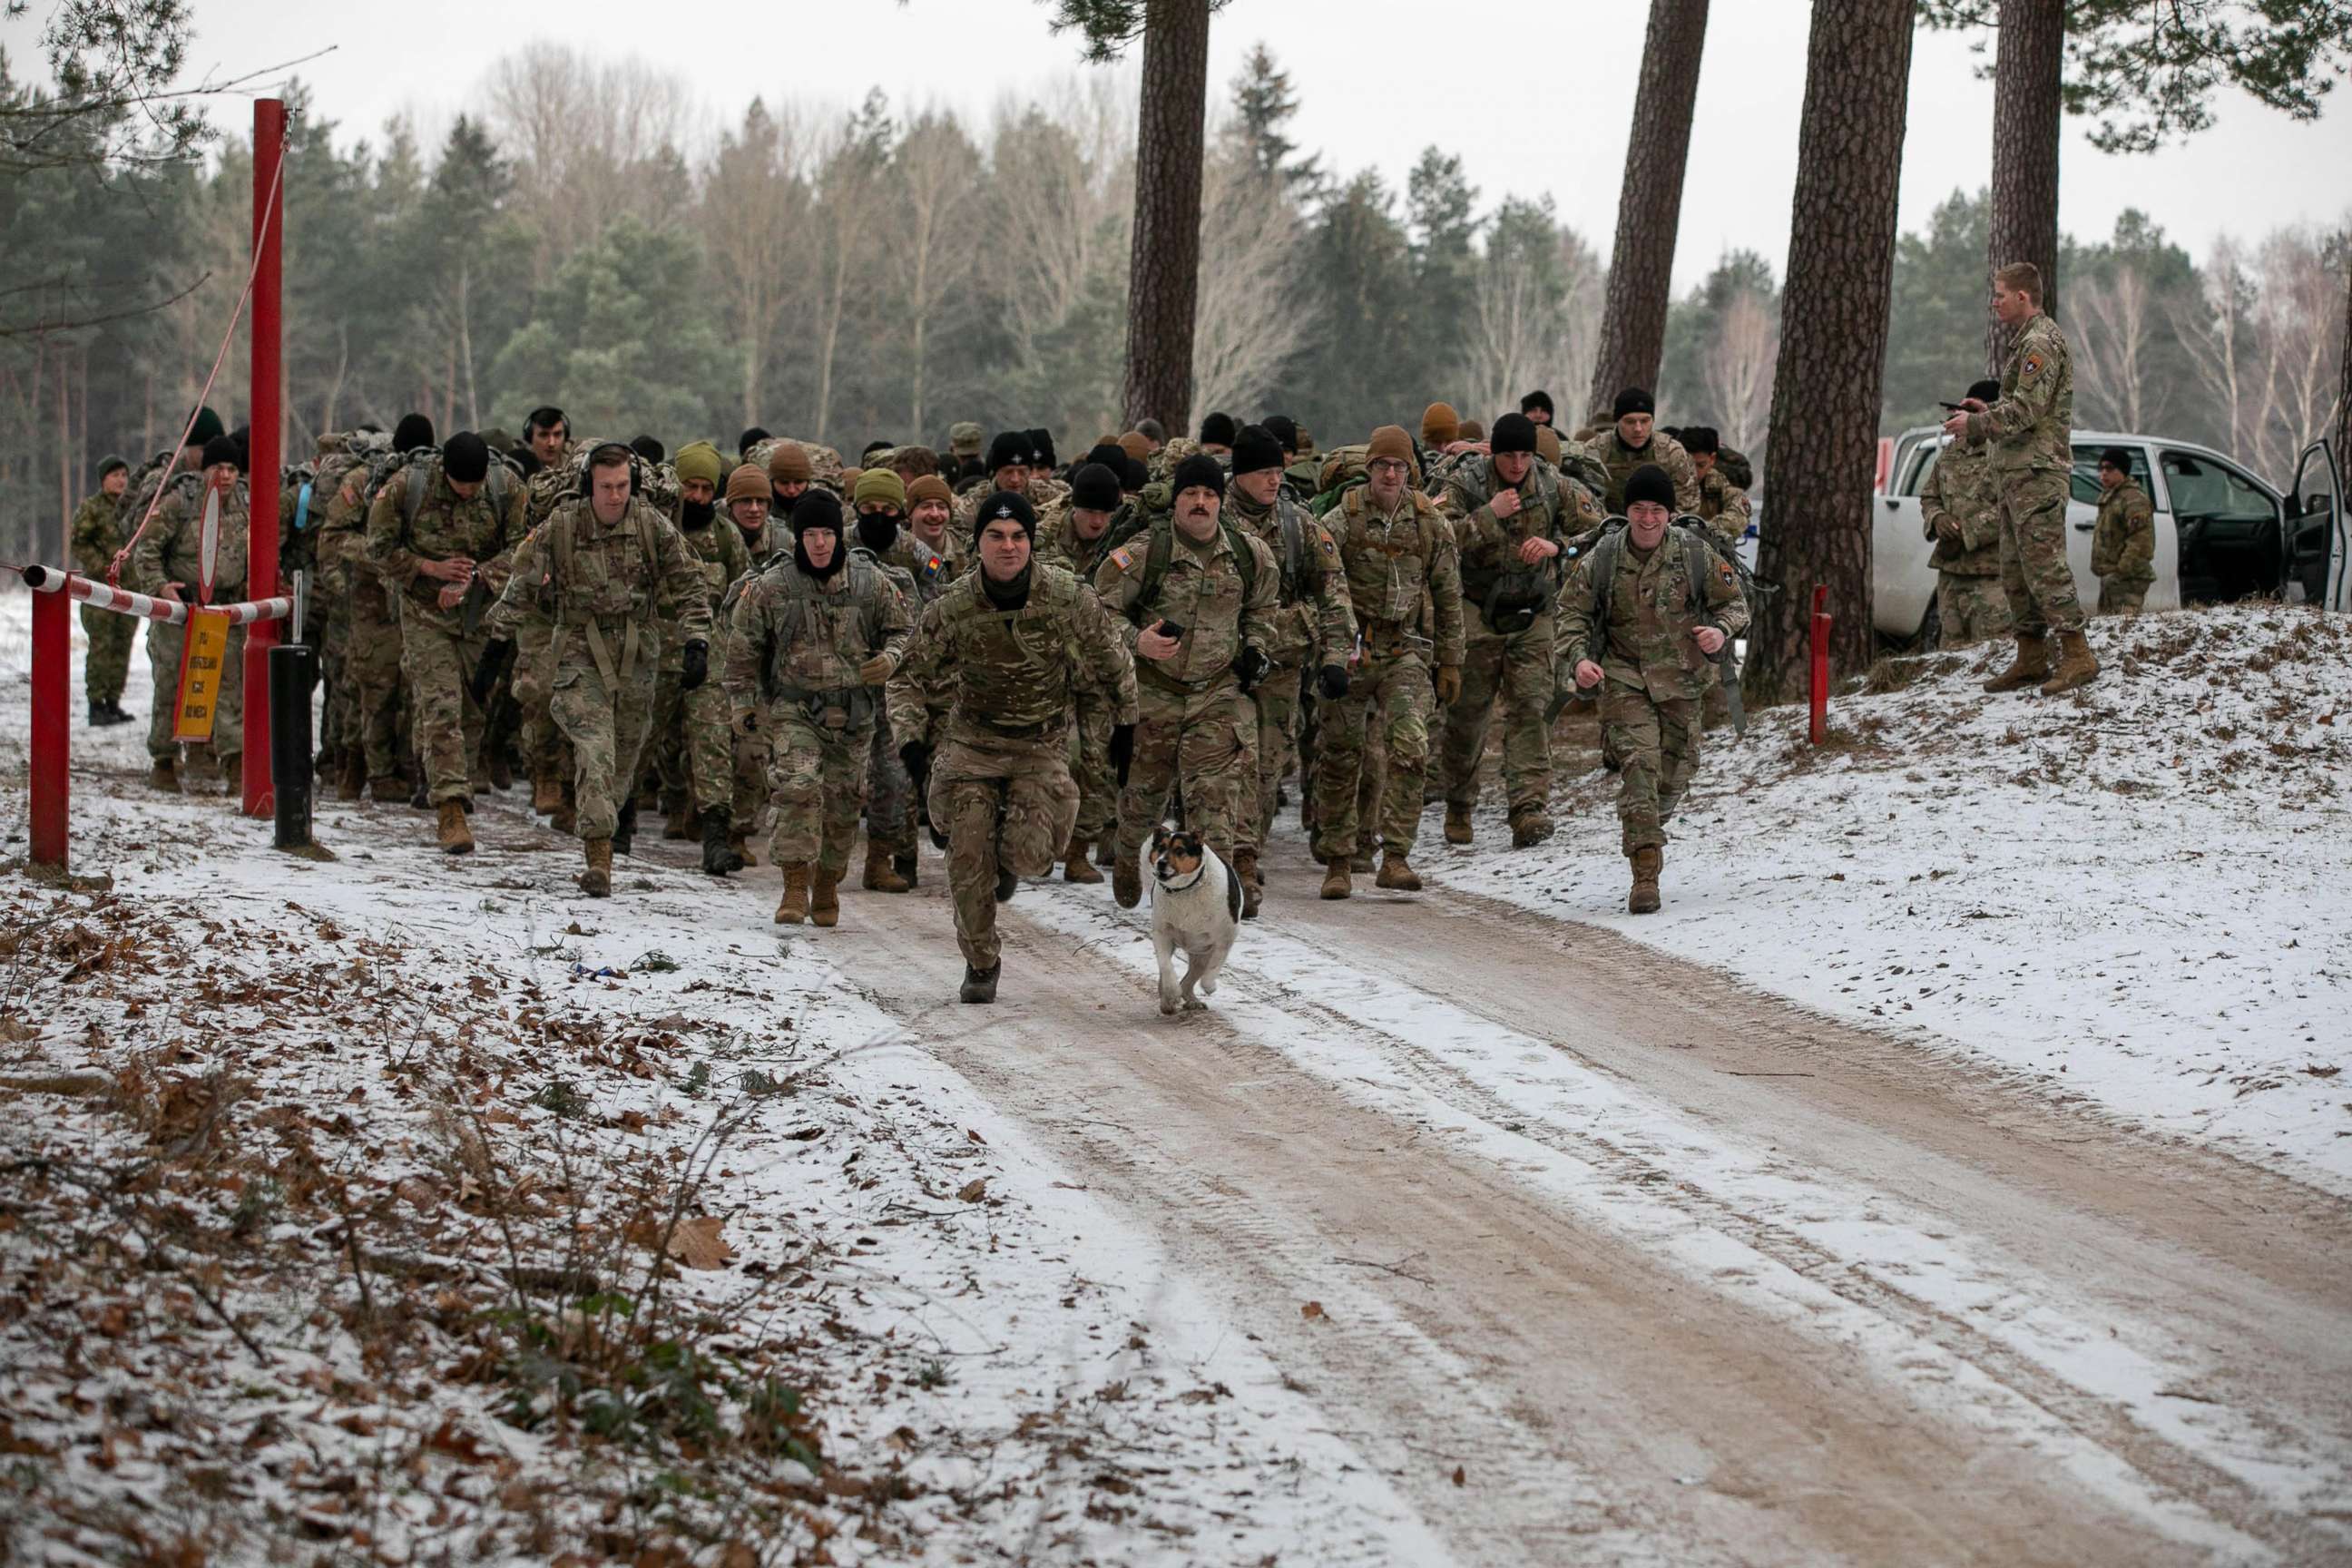 PHOTO: Soldiers of U.S.-led battle group Battle Group Poland march at Bemowo Piskie Training Area in Poland on Jan 26, 2022.